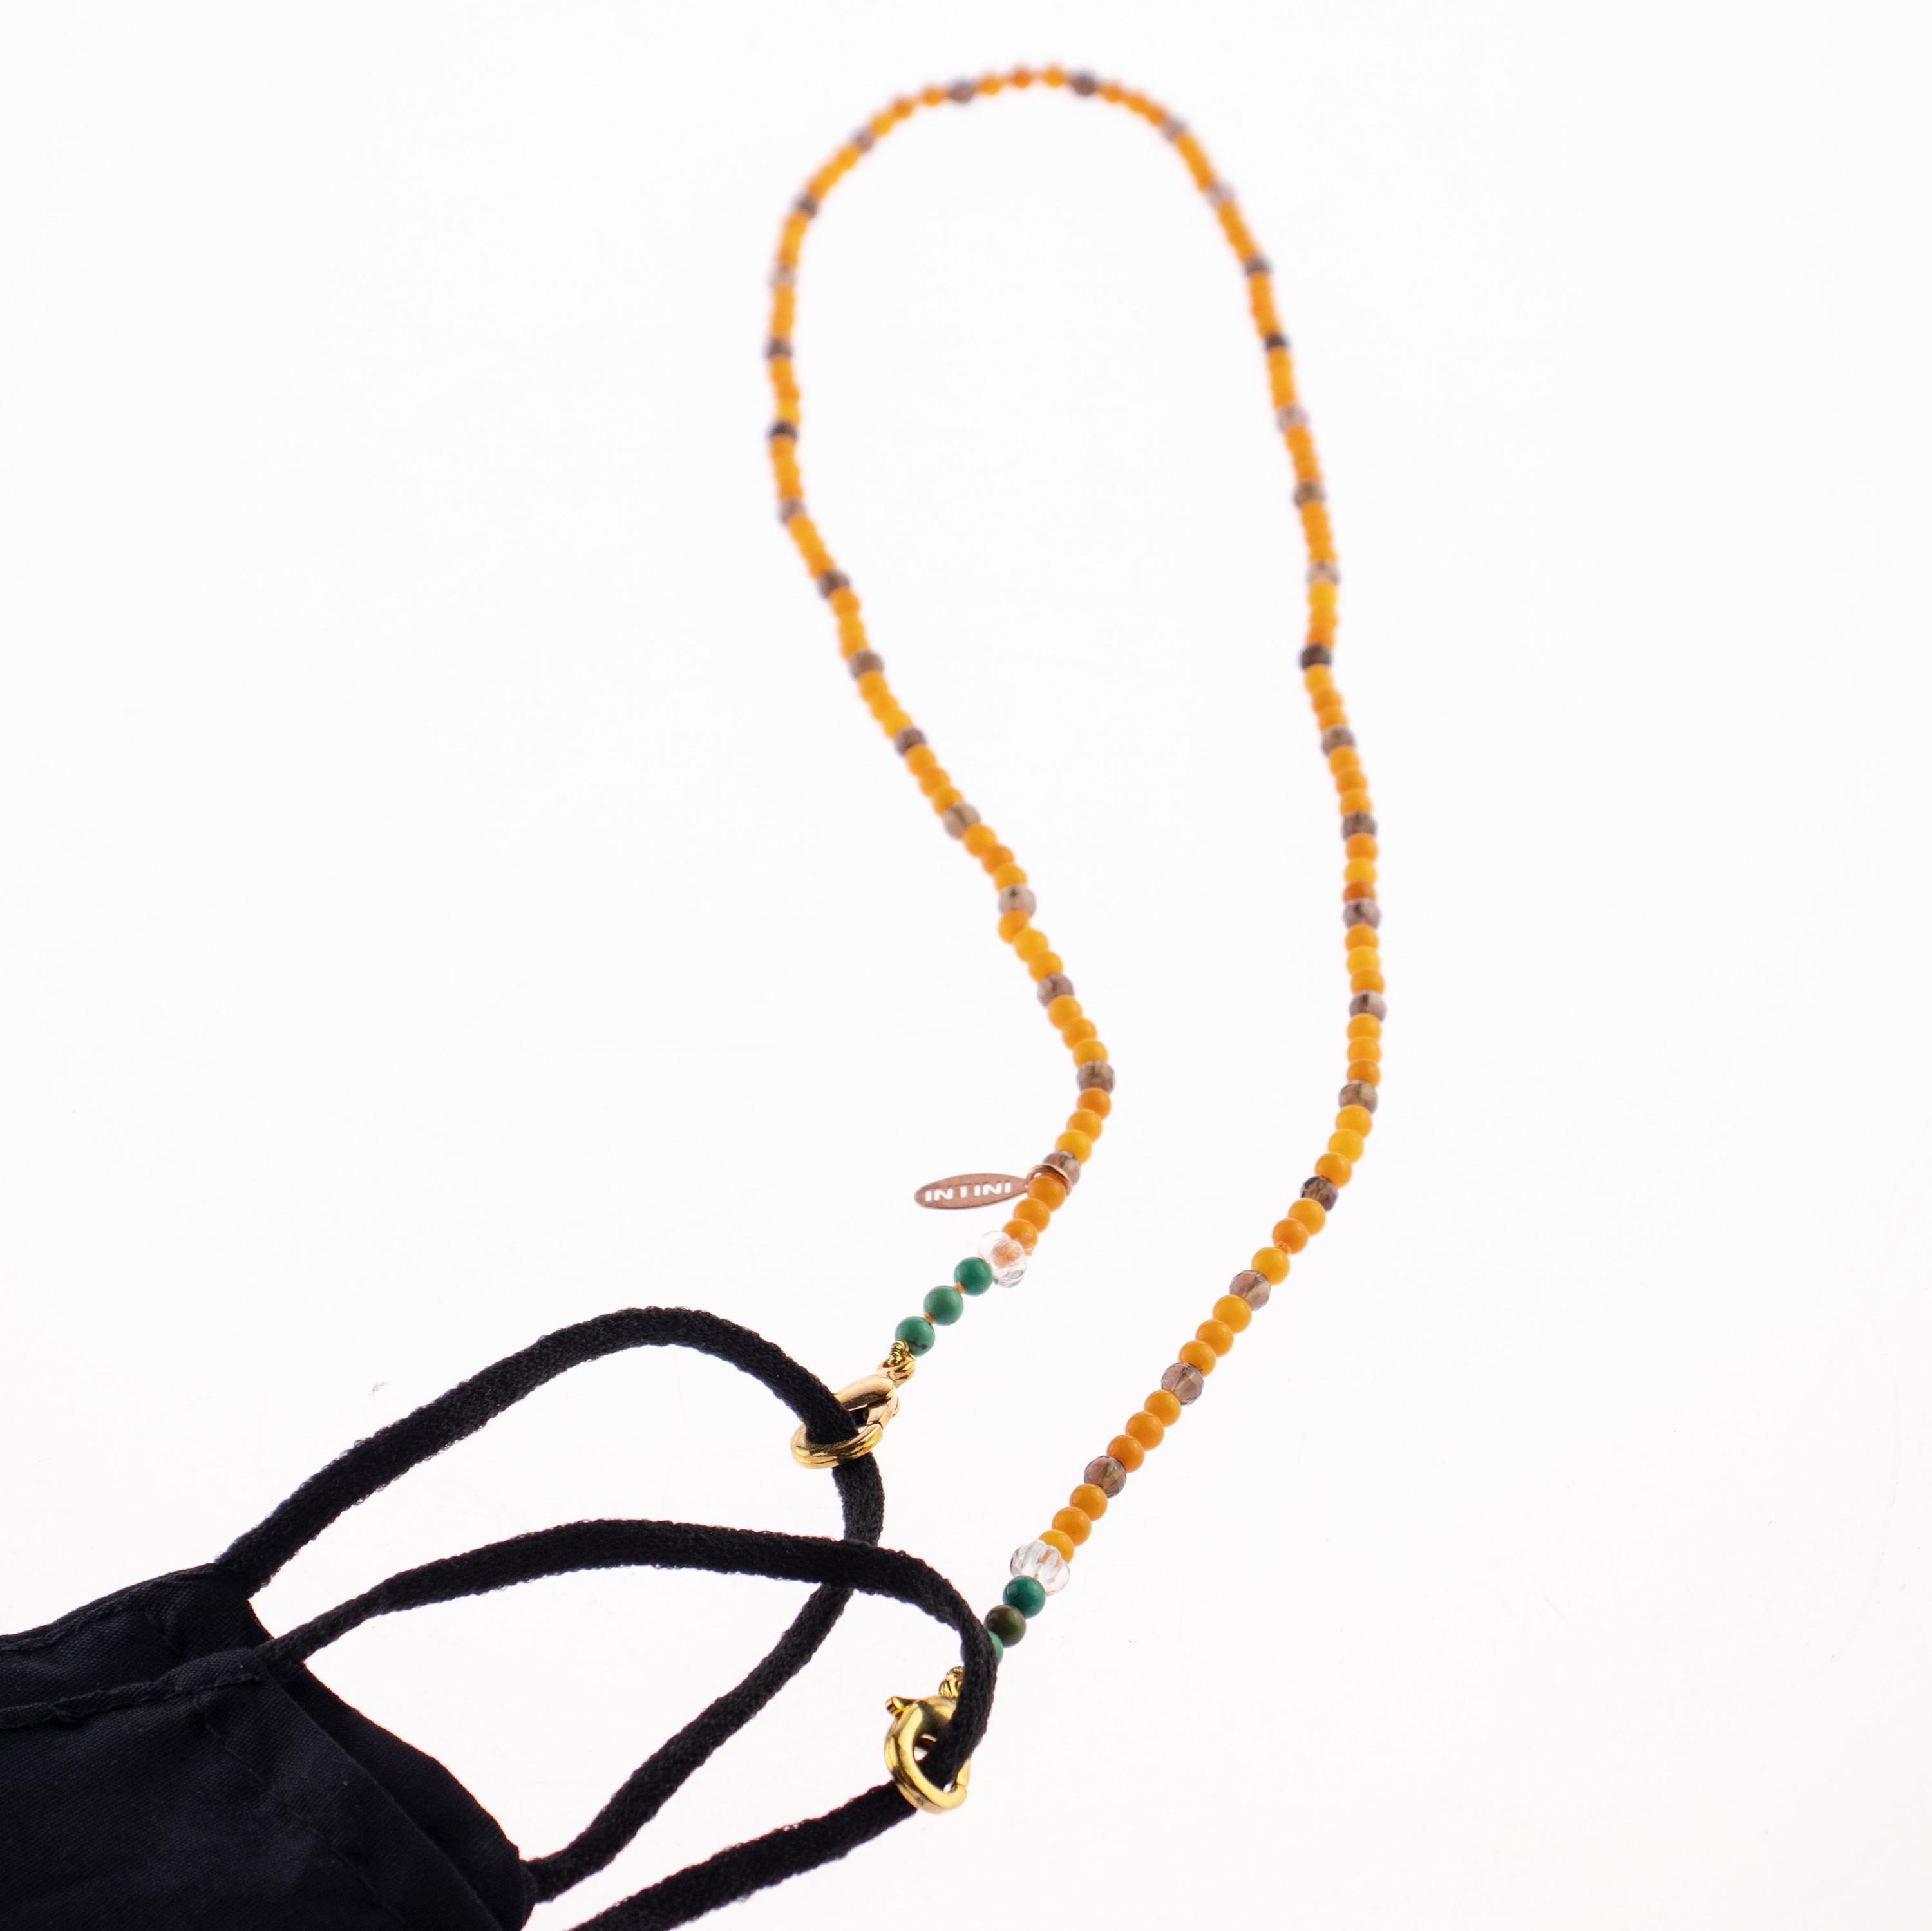 Now face masks are part of our daily necessities, carry yours whenever you want and wherever you go and avoid having your mask dangling off one ear or around your chin! Keep your mask close with this beaded chain and avoid putting it on the table or